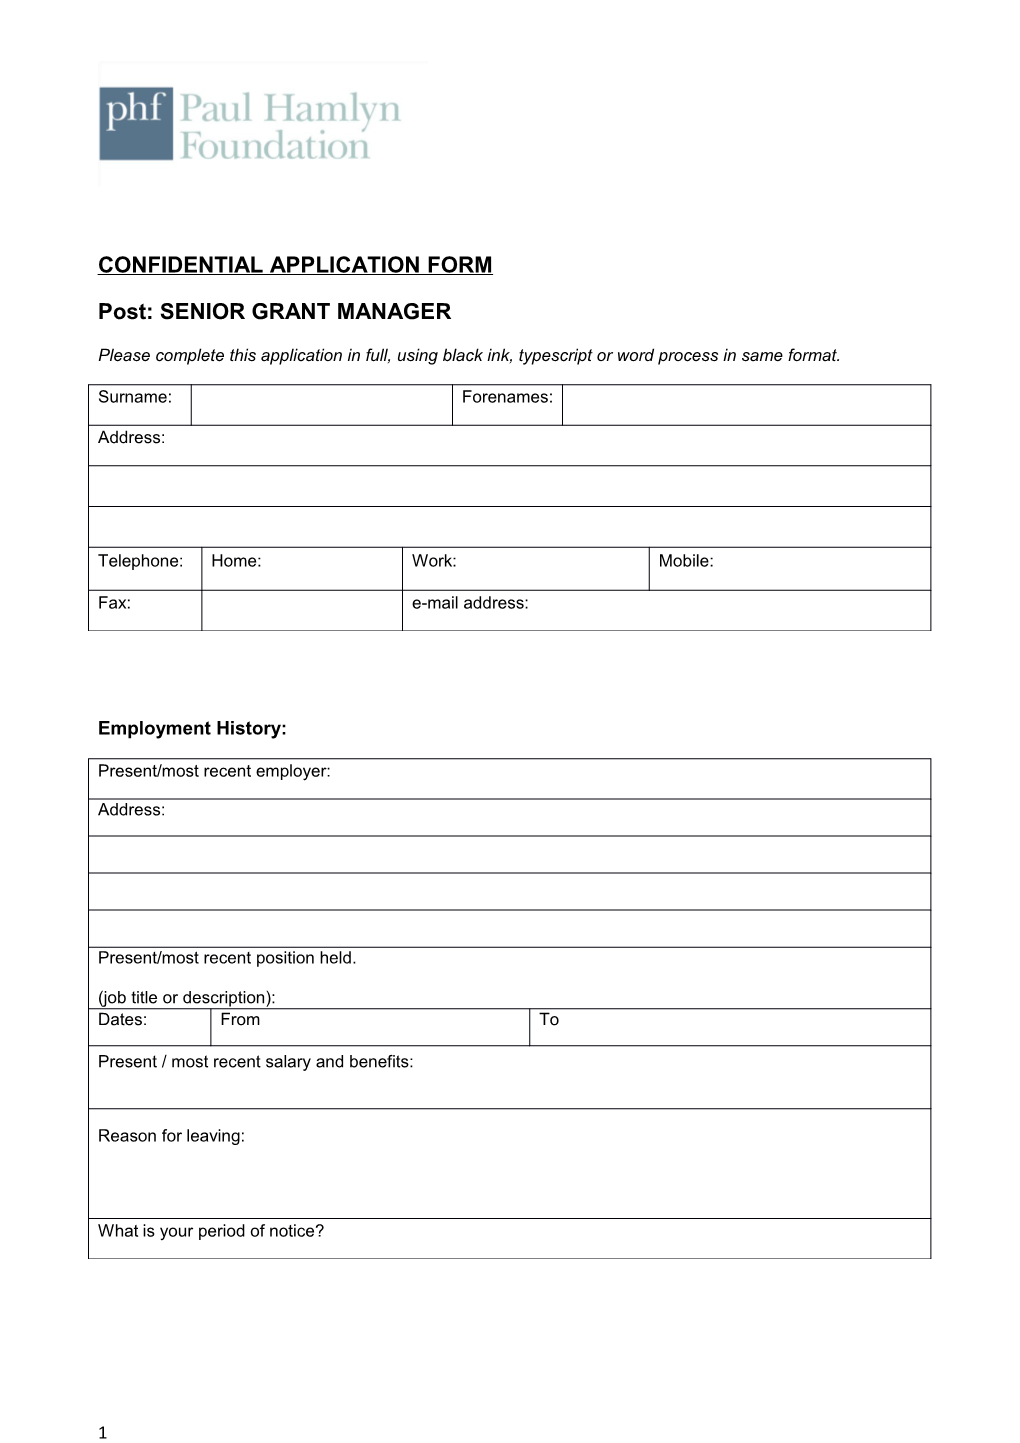 Confidential Application Form s1